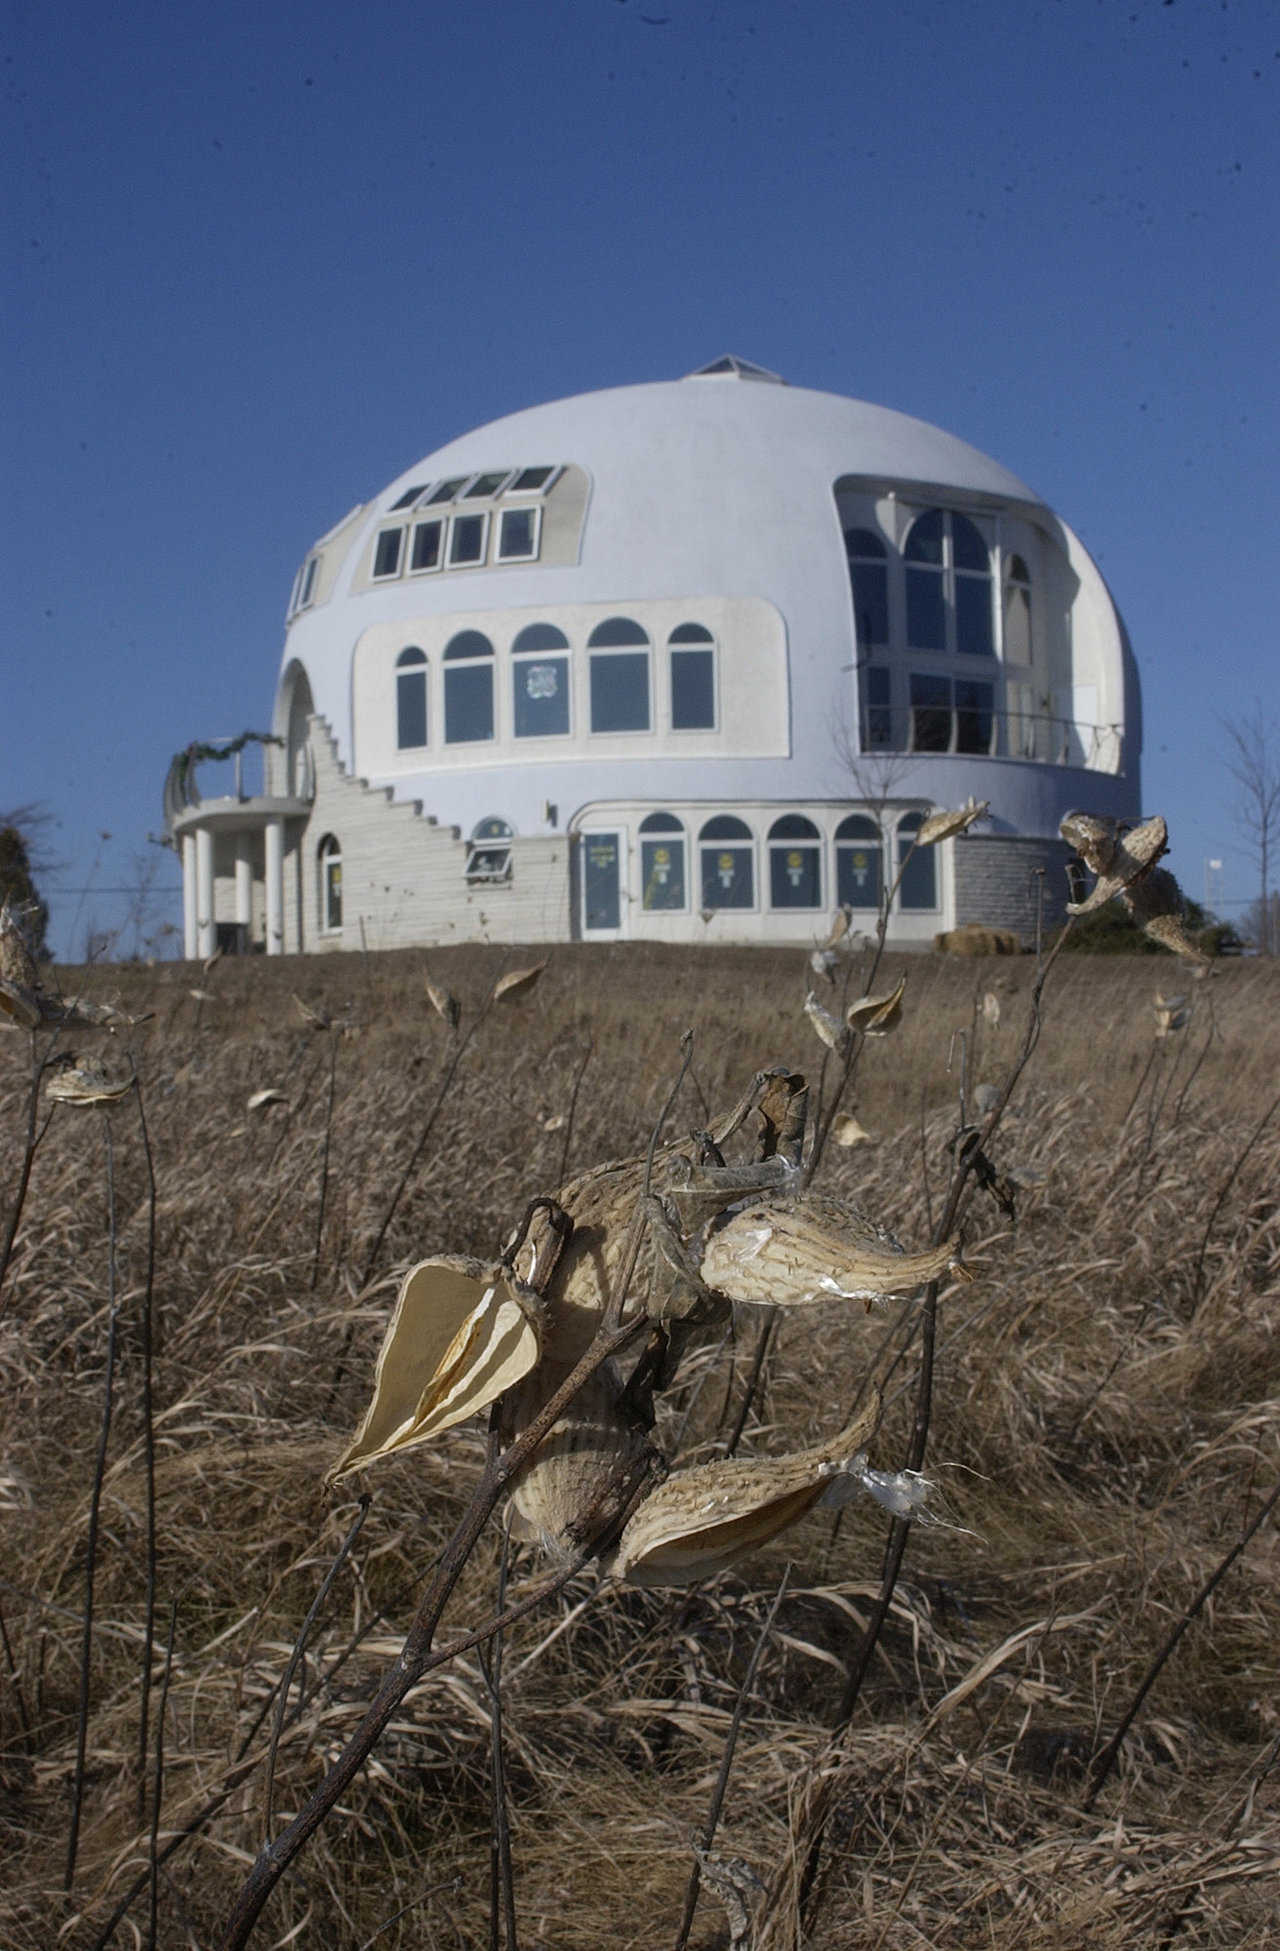 The Disappearing Dome — This dream-come-true home in Manitowoc, Wisconsin is a Monolithic Dome with a diameter of 55 feet and three stories. It overlooks Lake Michigan and on foggy days because almost invisible.